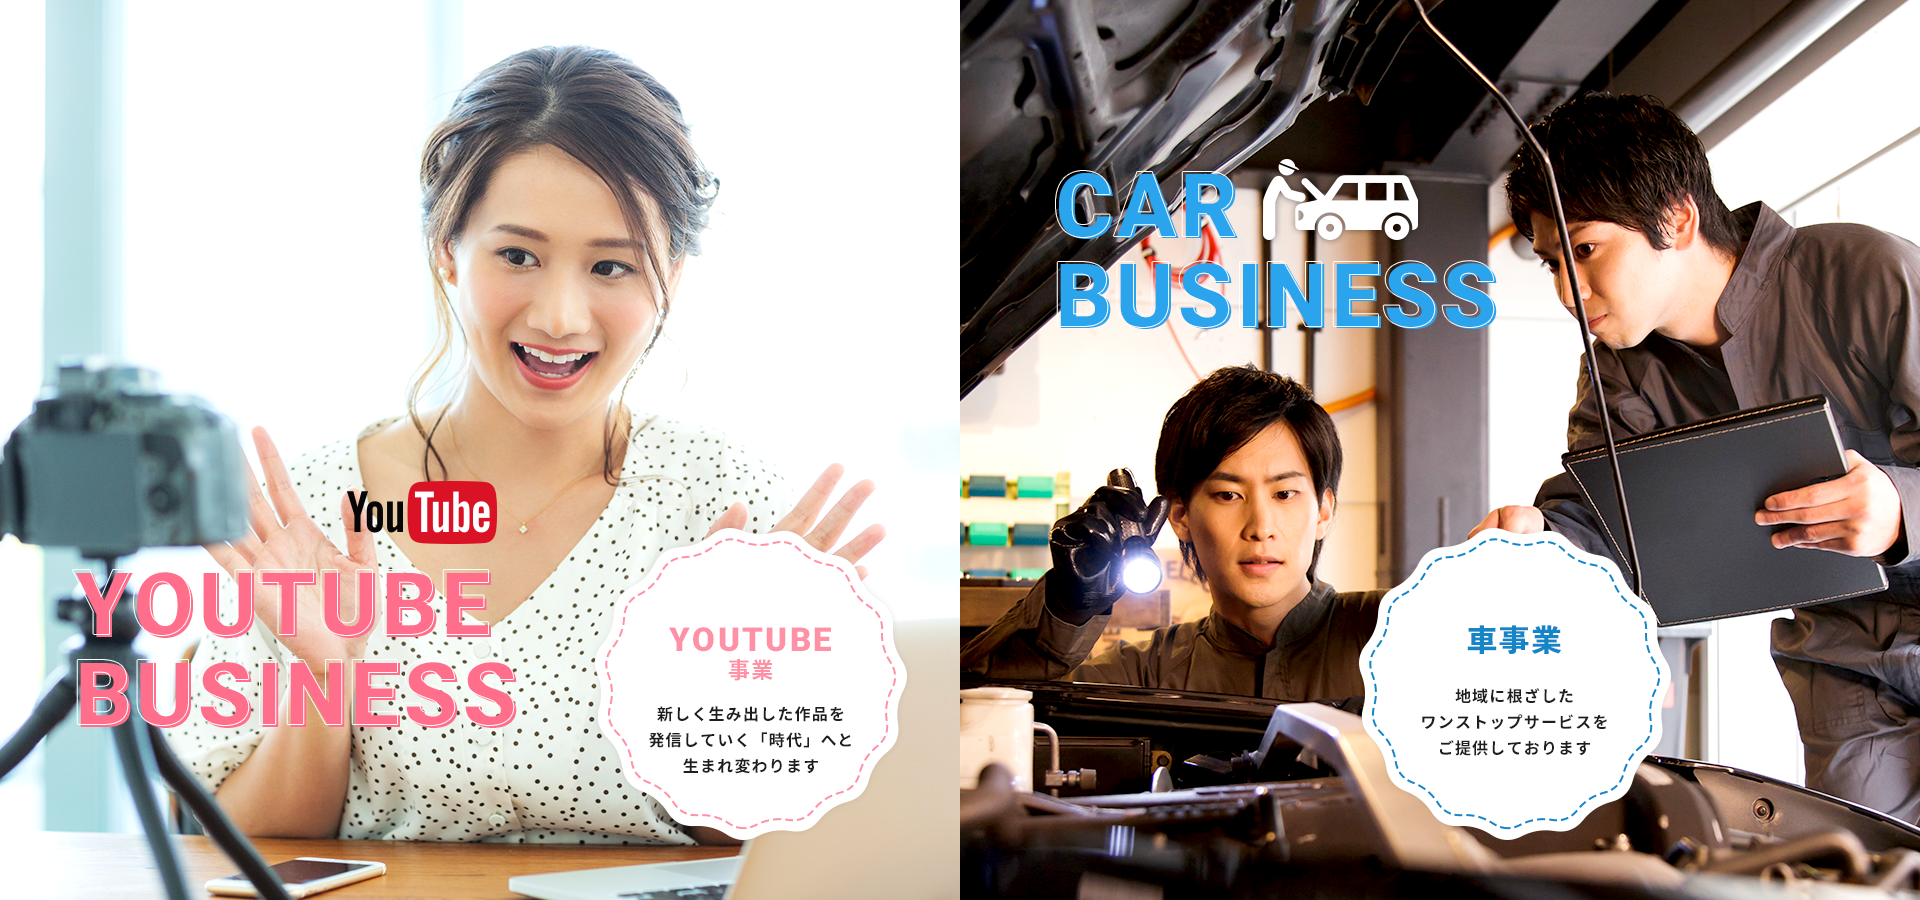 youtube business & car business